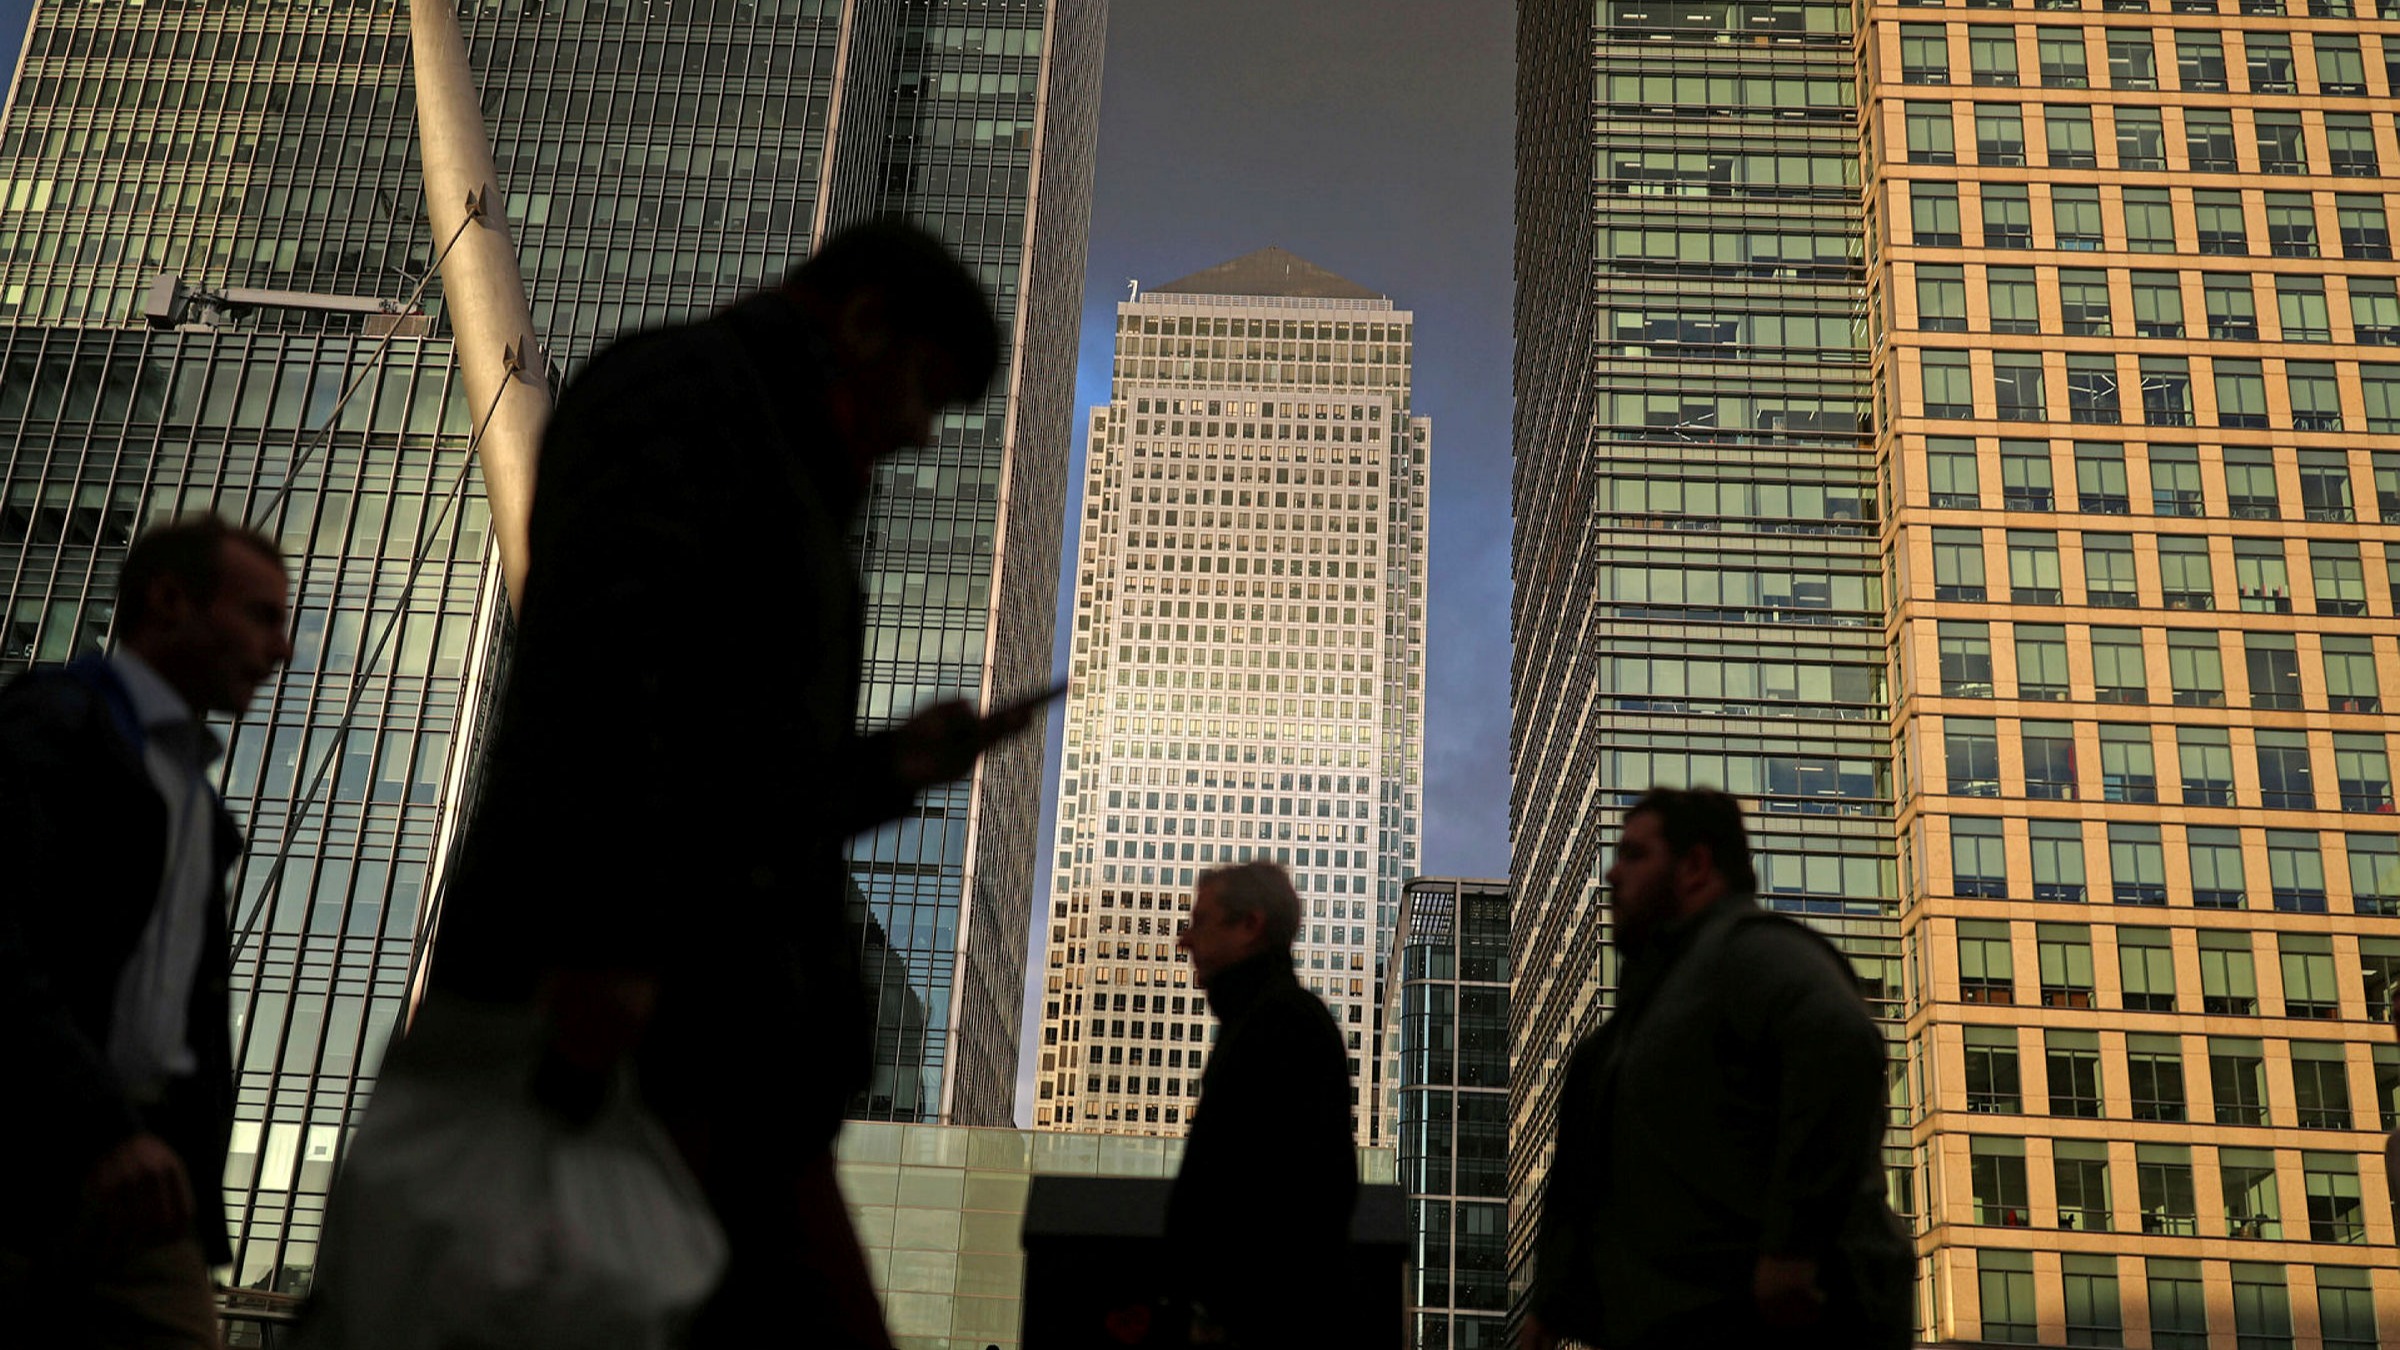 London S Canary Wharf Set For Increased Worker Numbers As Rules Are Relaxed Financial Times